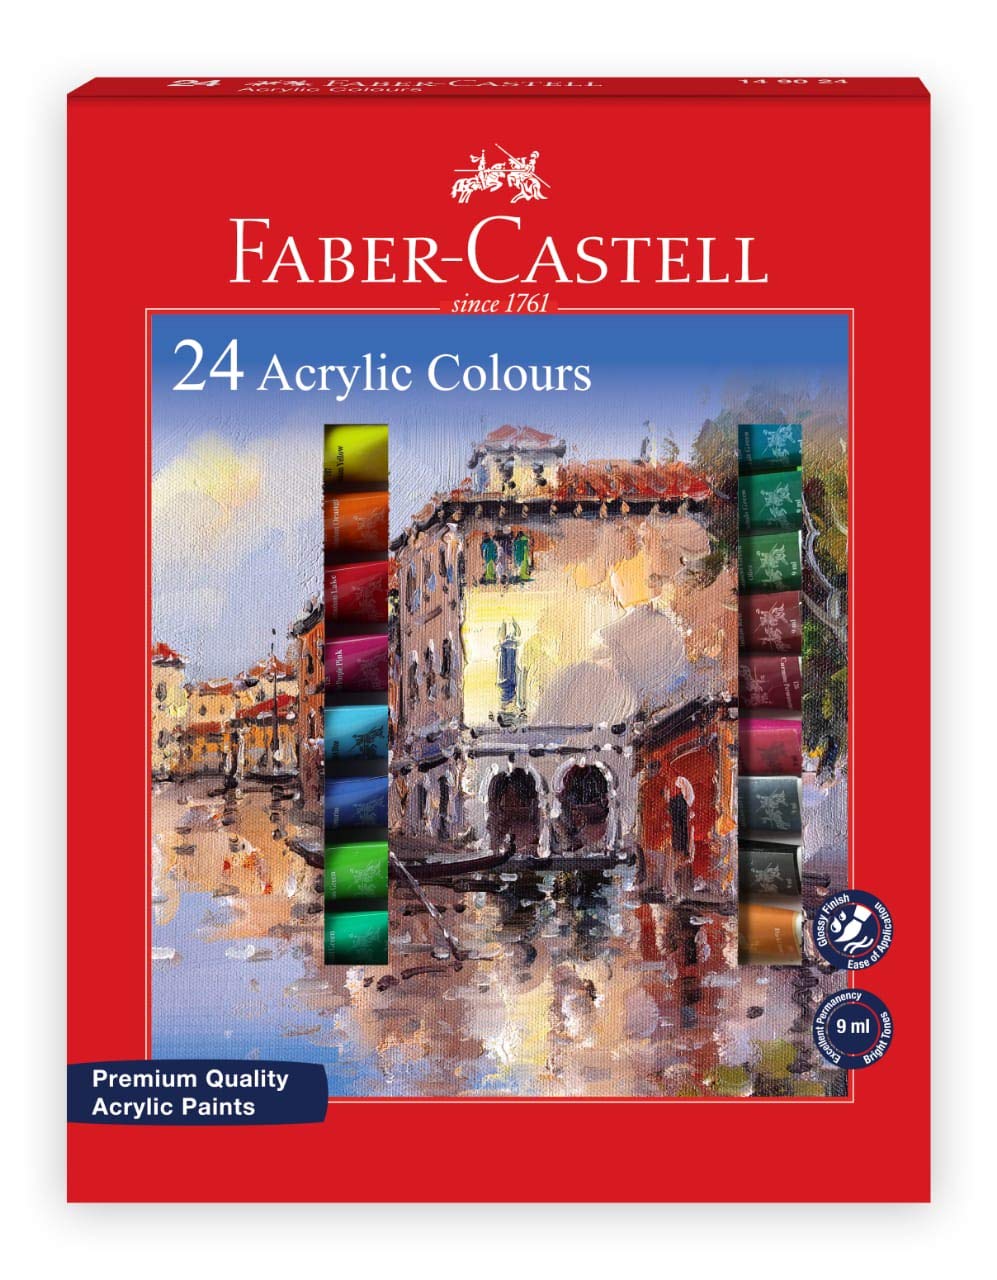 Faber-Castell Student Acrylic 9 ml Set of 24